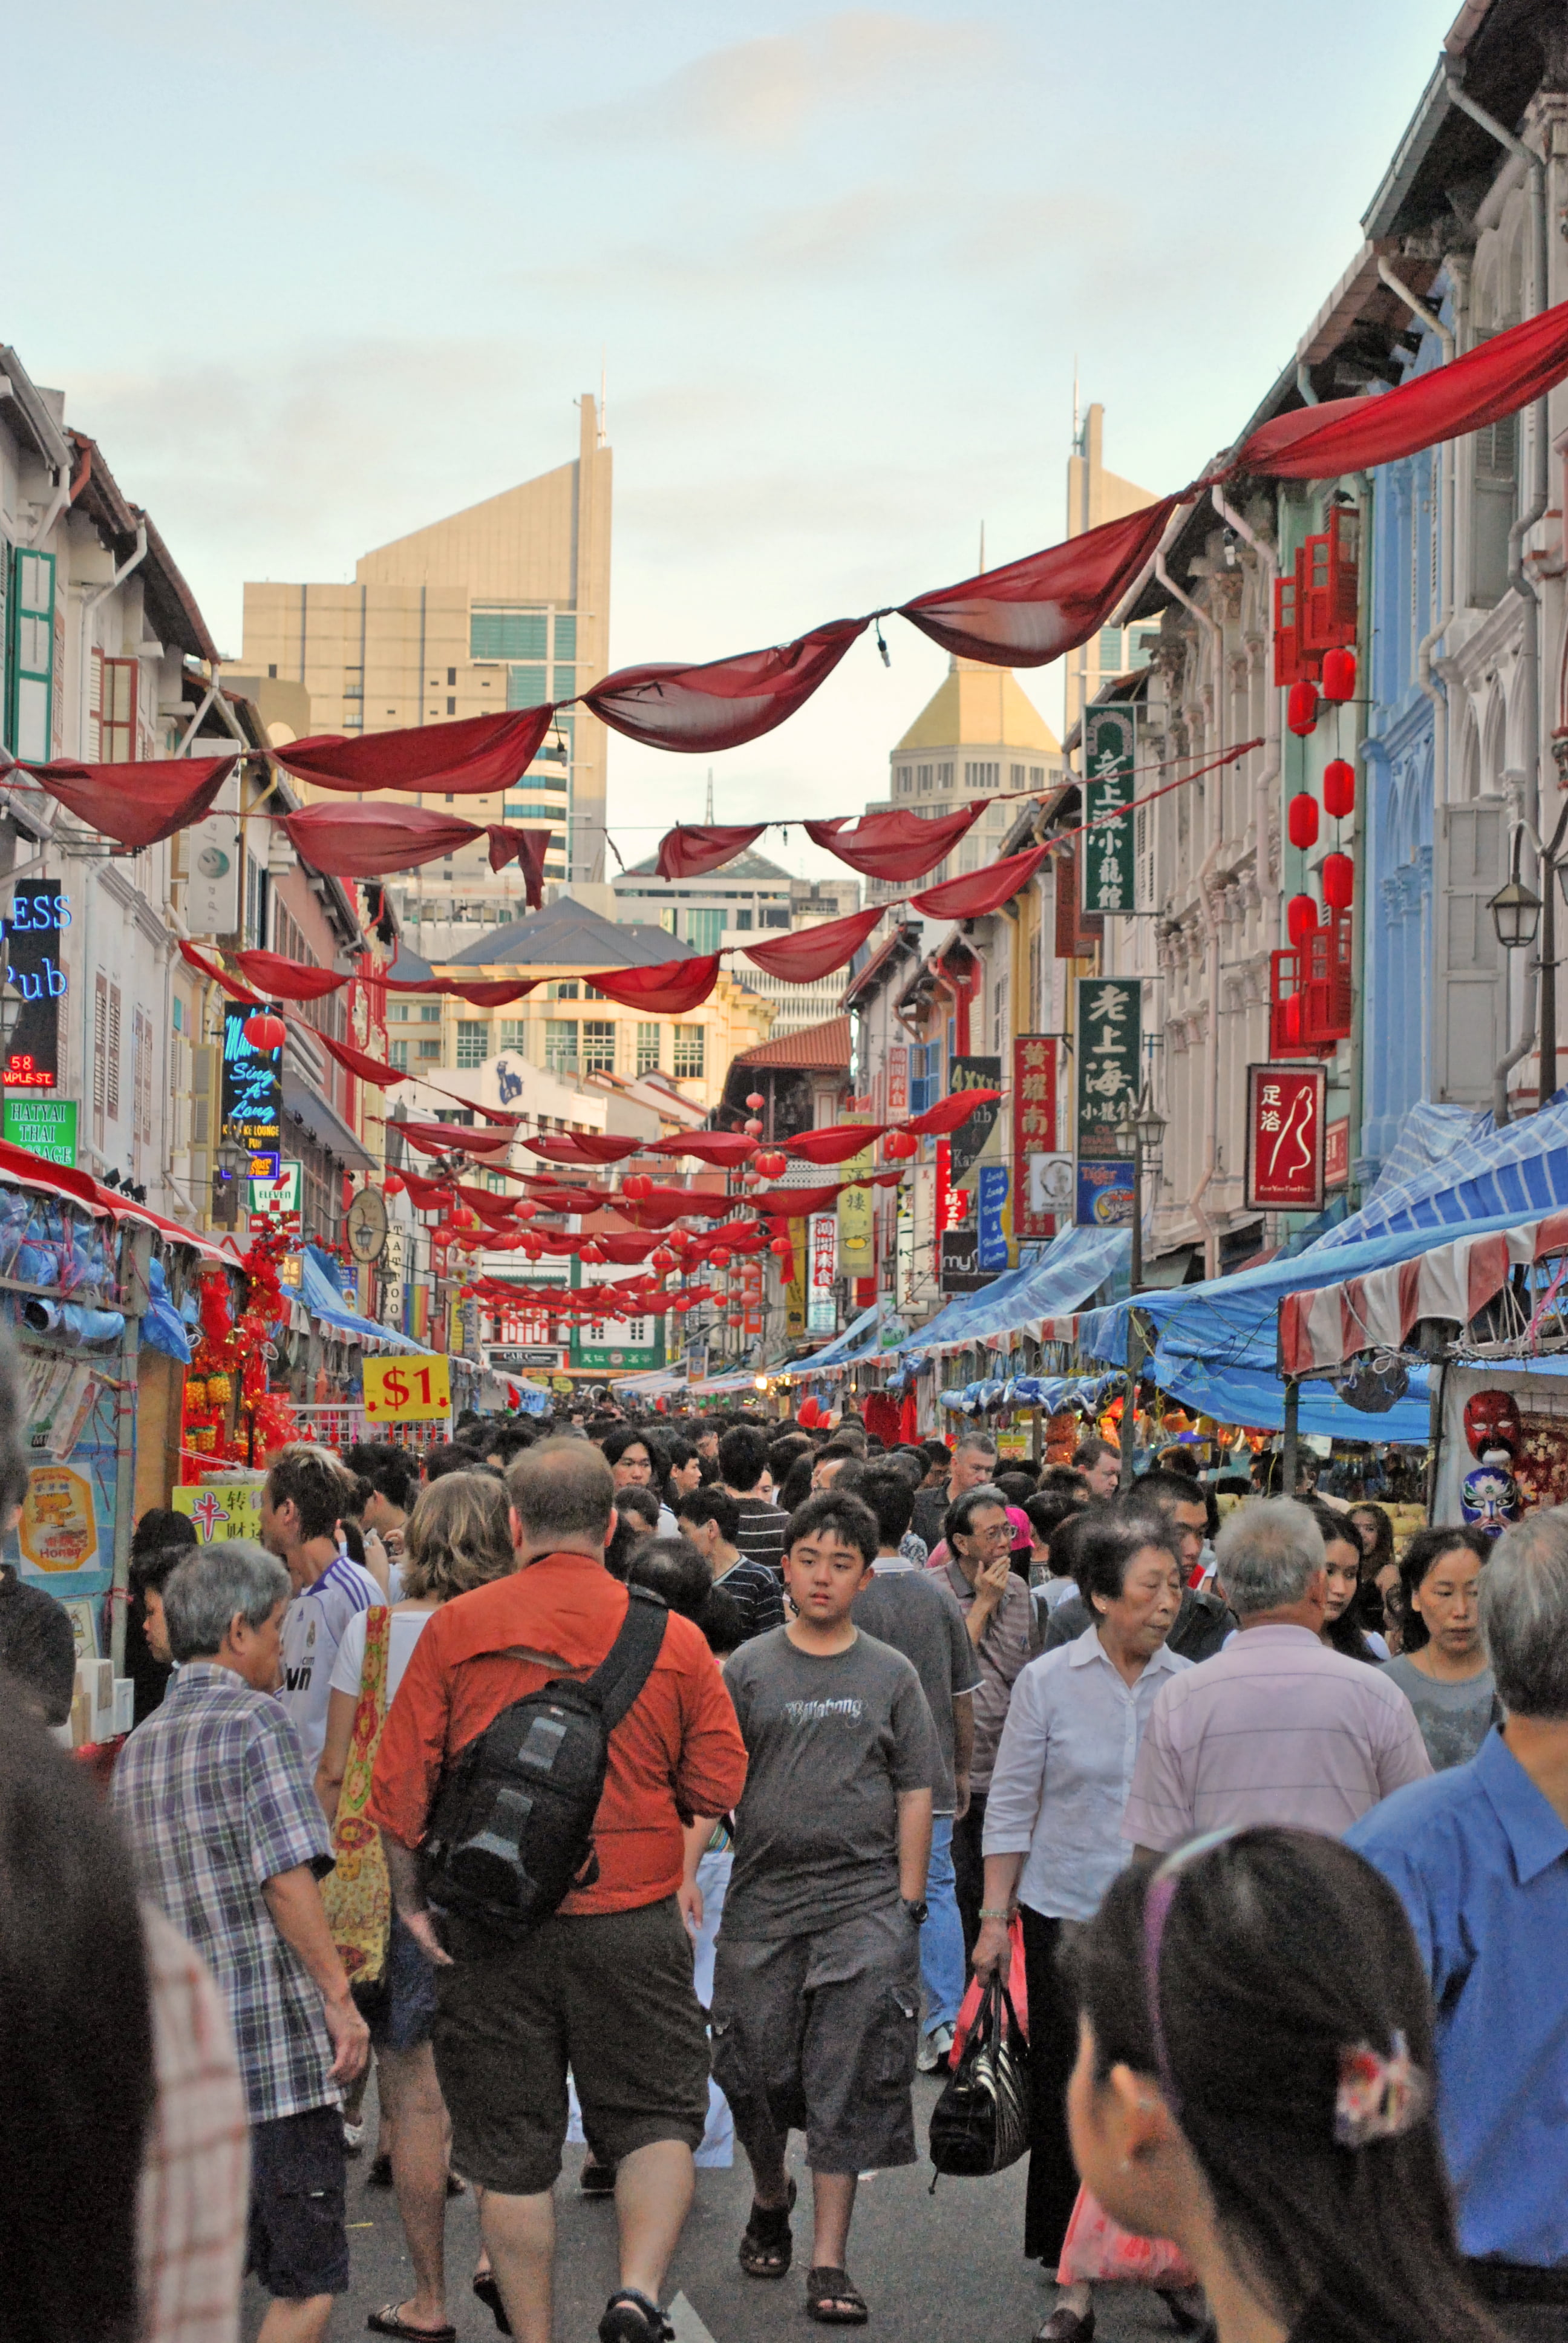 A buzzing street scene in Singapore's Chinatown